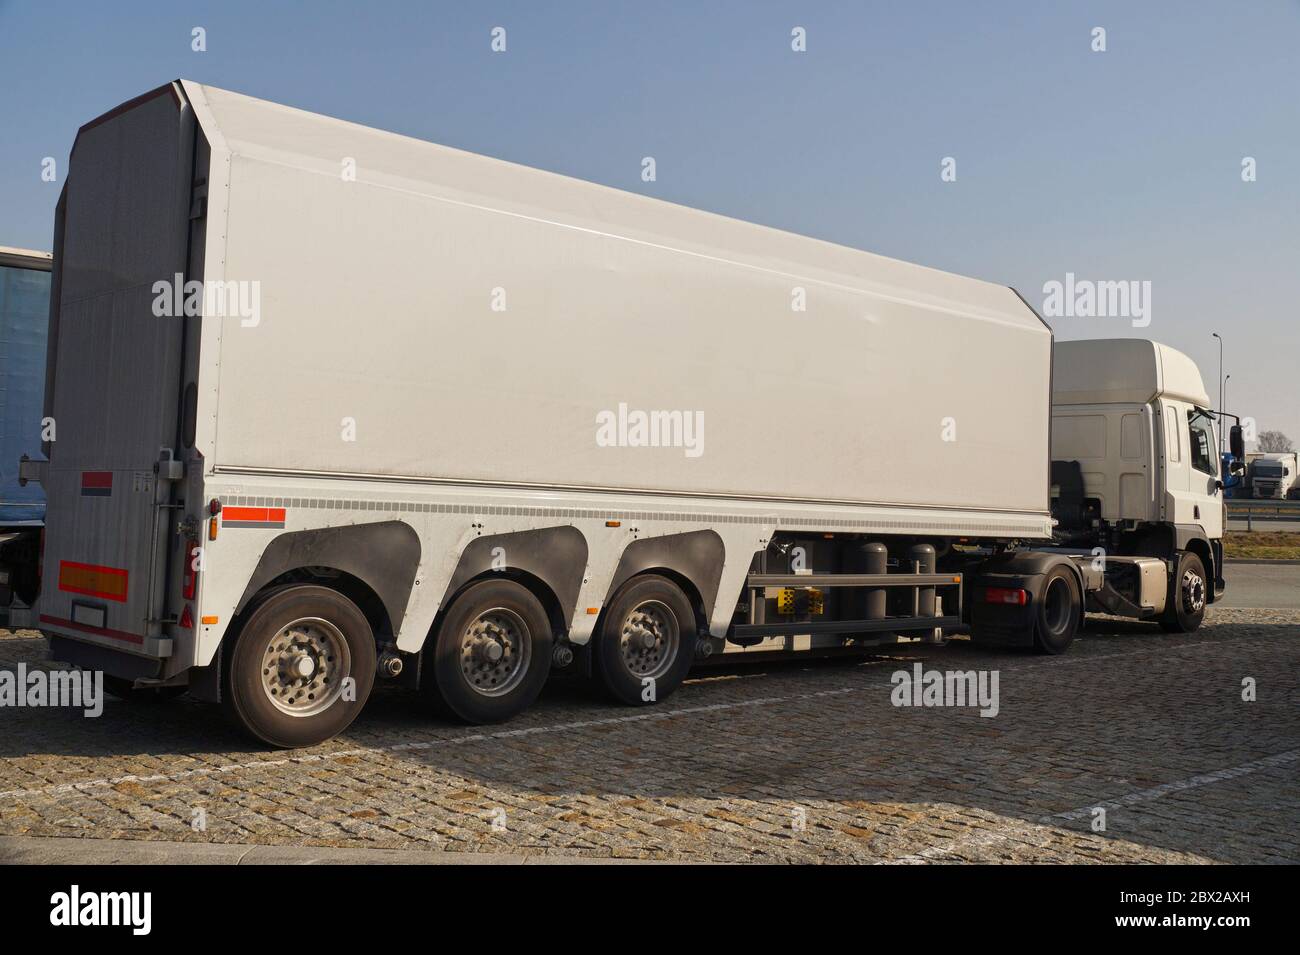 A truck with a specialist trailer for the transport of concrete slabs and glass. Stock Photo